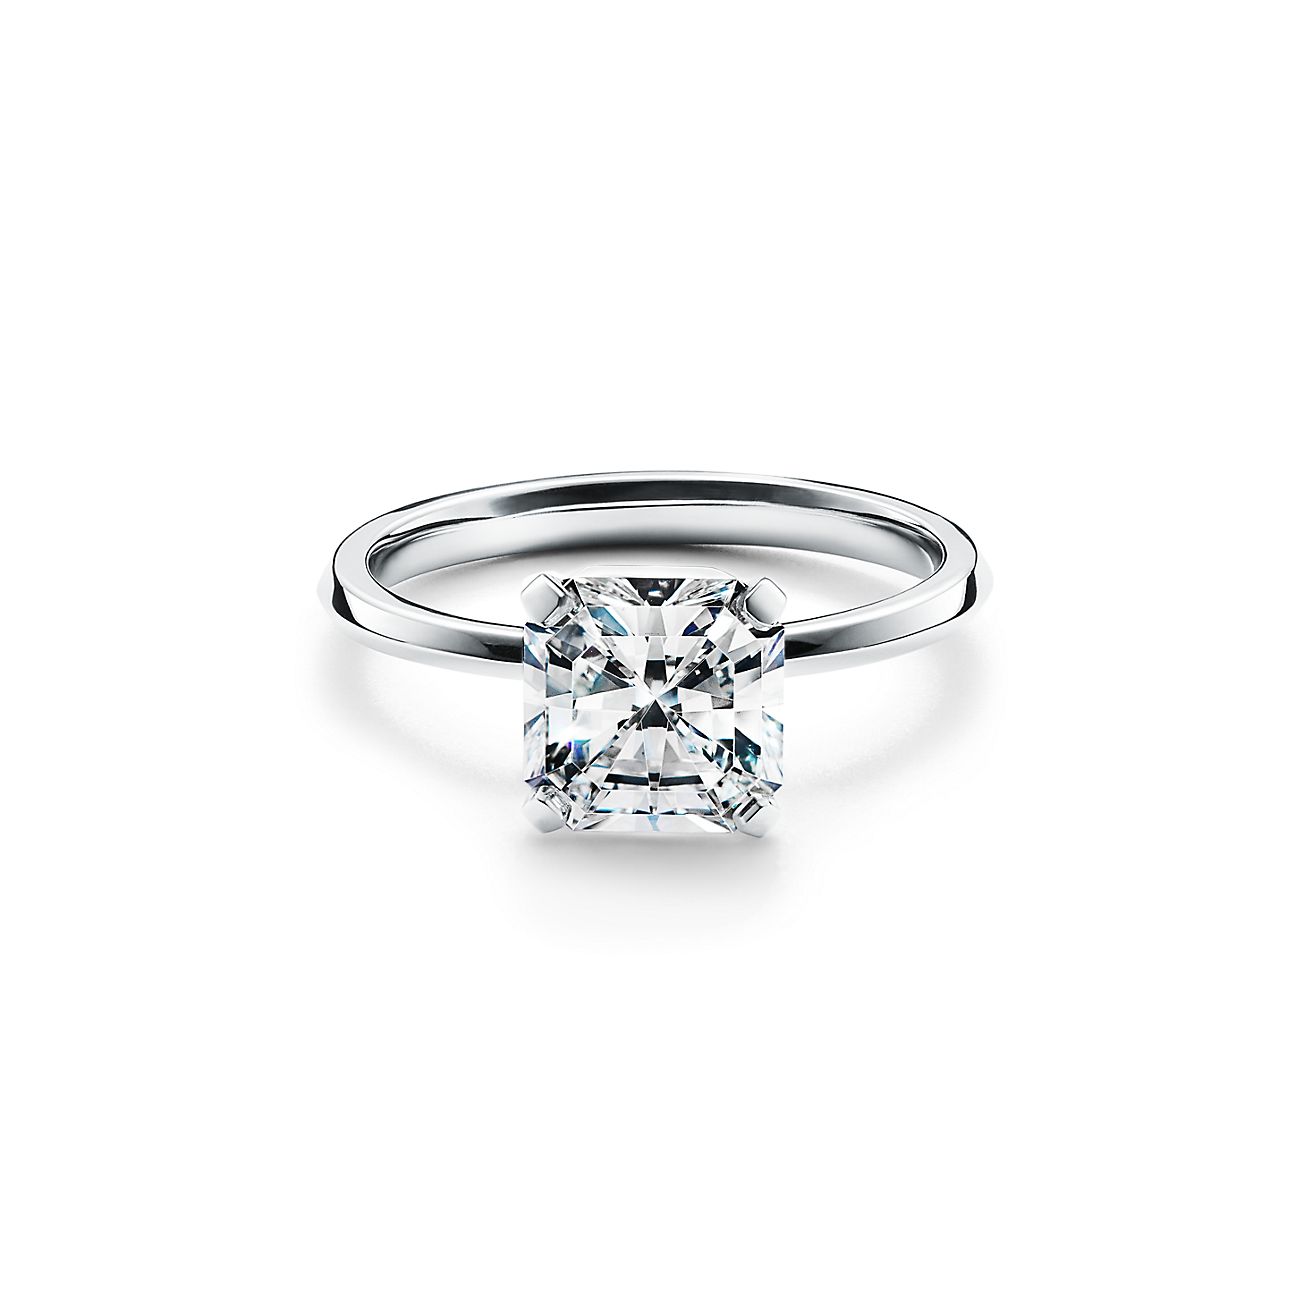 7 Engagement Ring Trends To Know For 2022